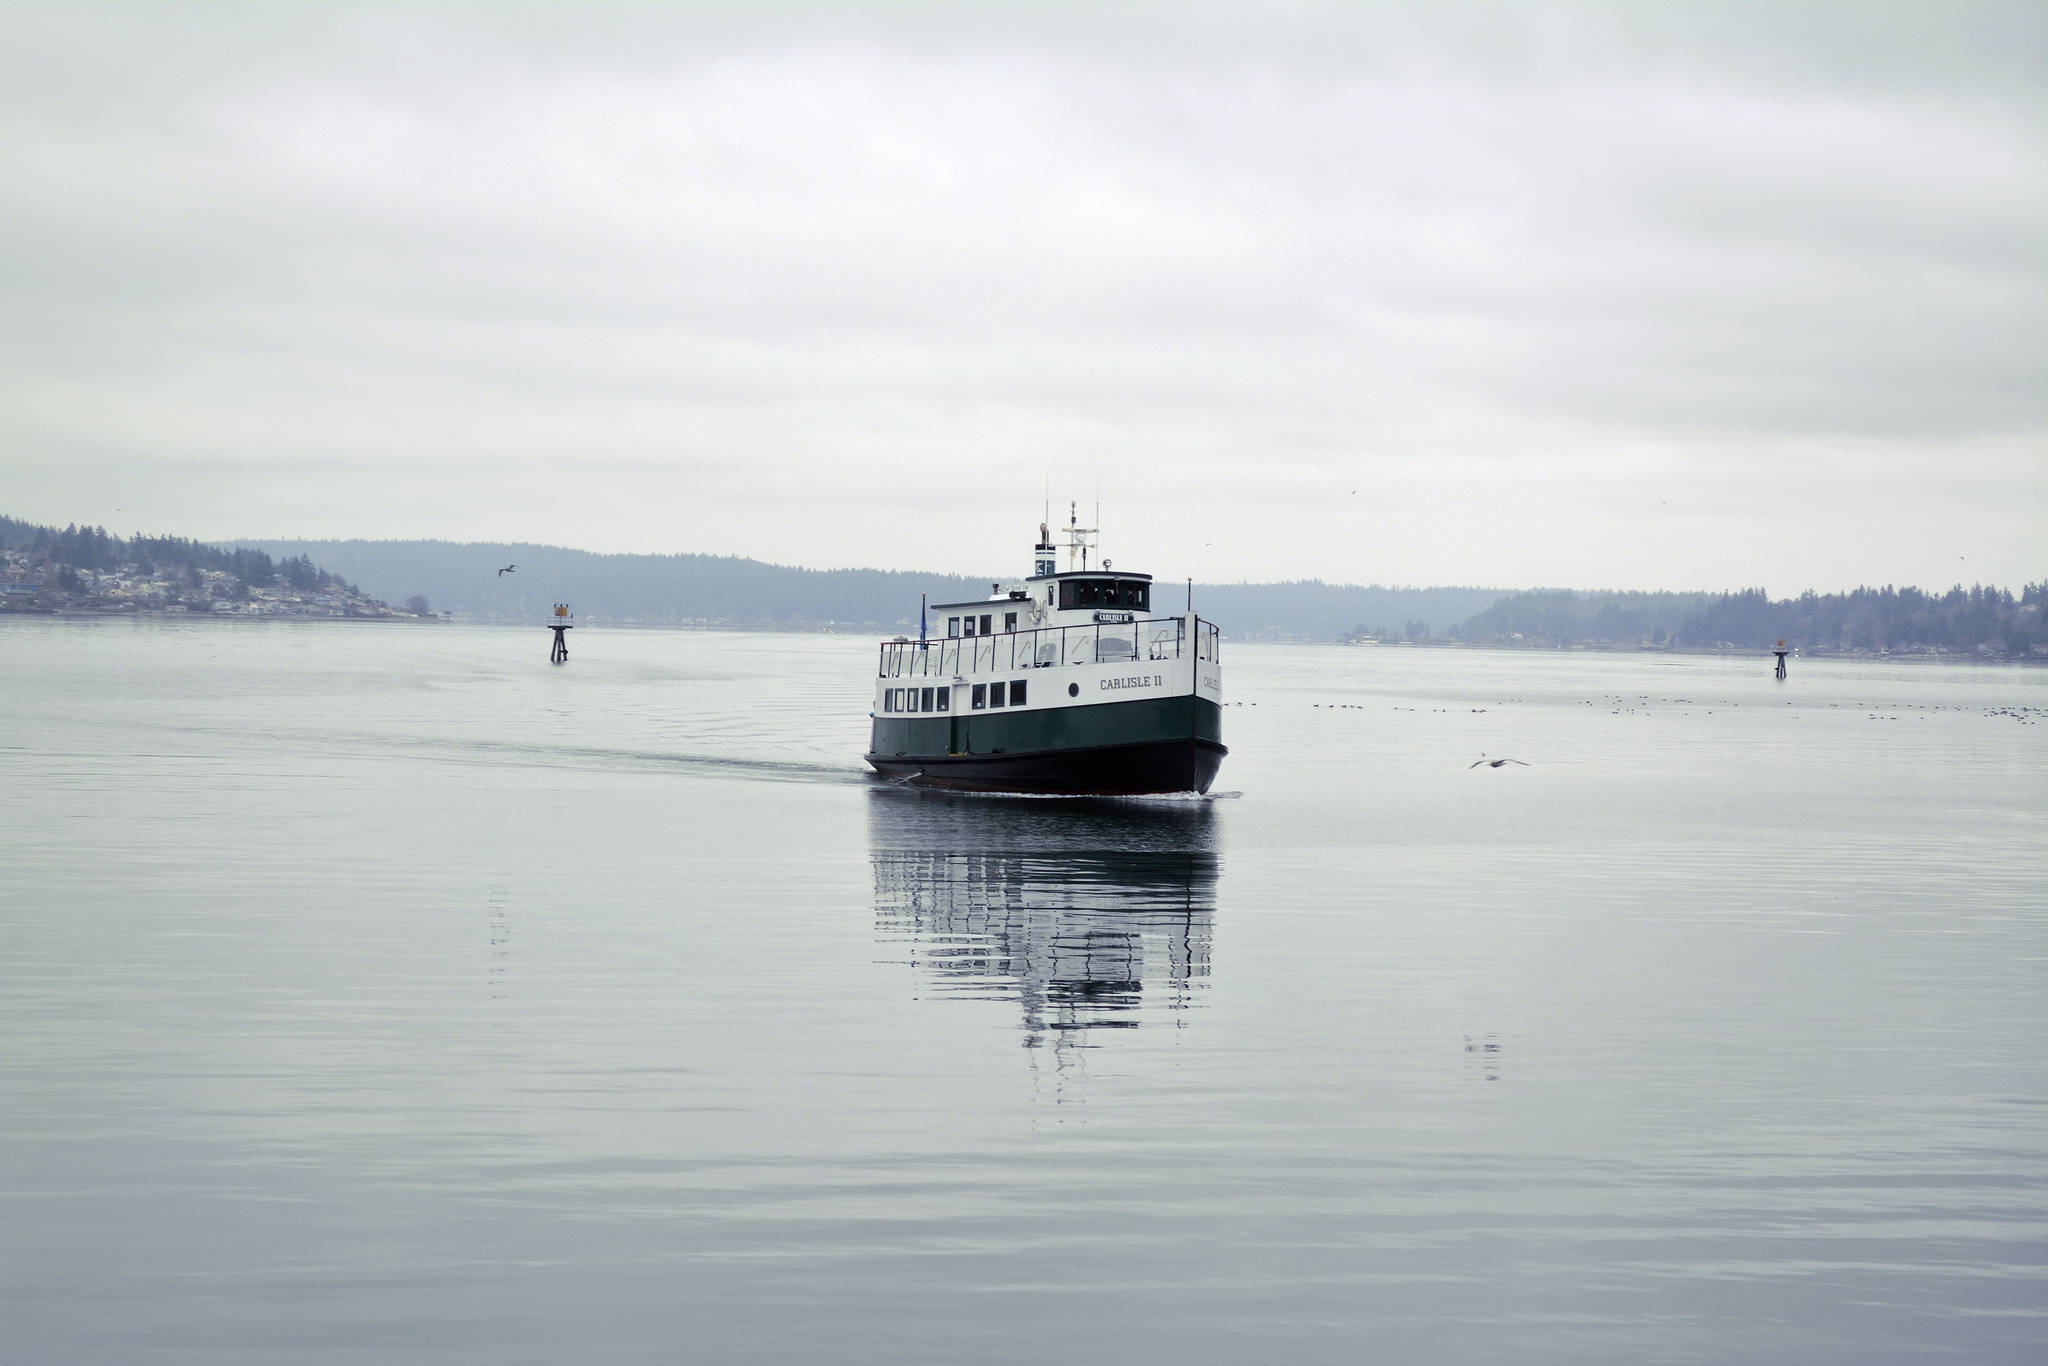 The Carlisle II, a foot ferry between downtown Port Orchard and downtown Bremerton arrives at the Port Orchard docks. (Mark Krulish/Kitsap News Group)